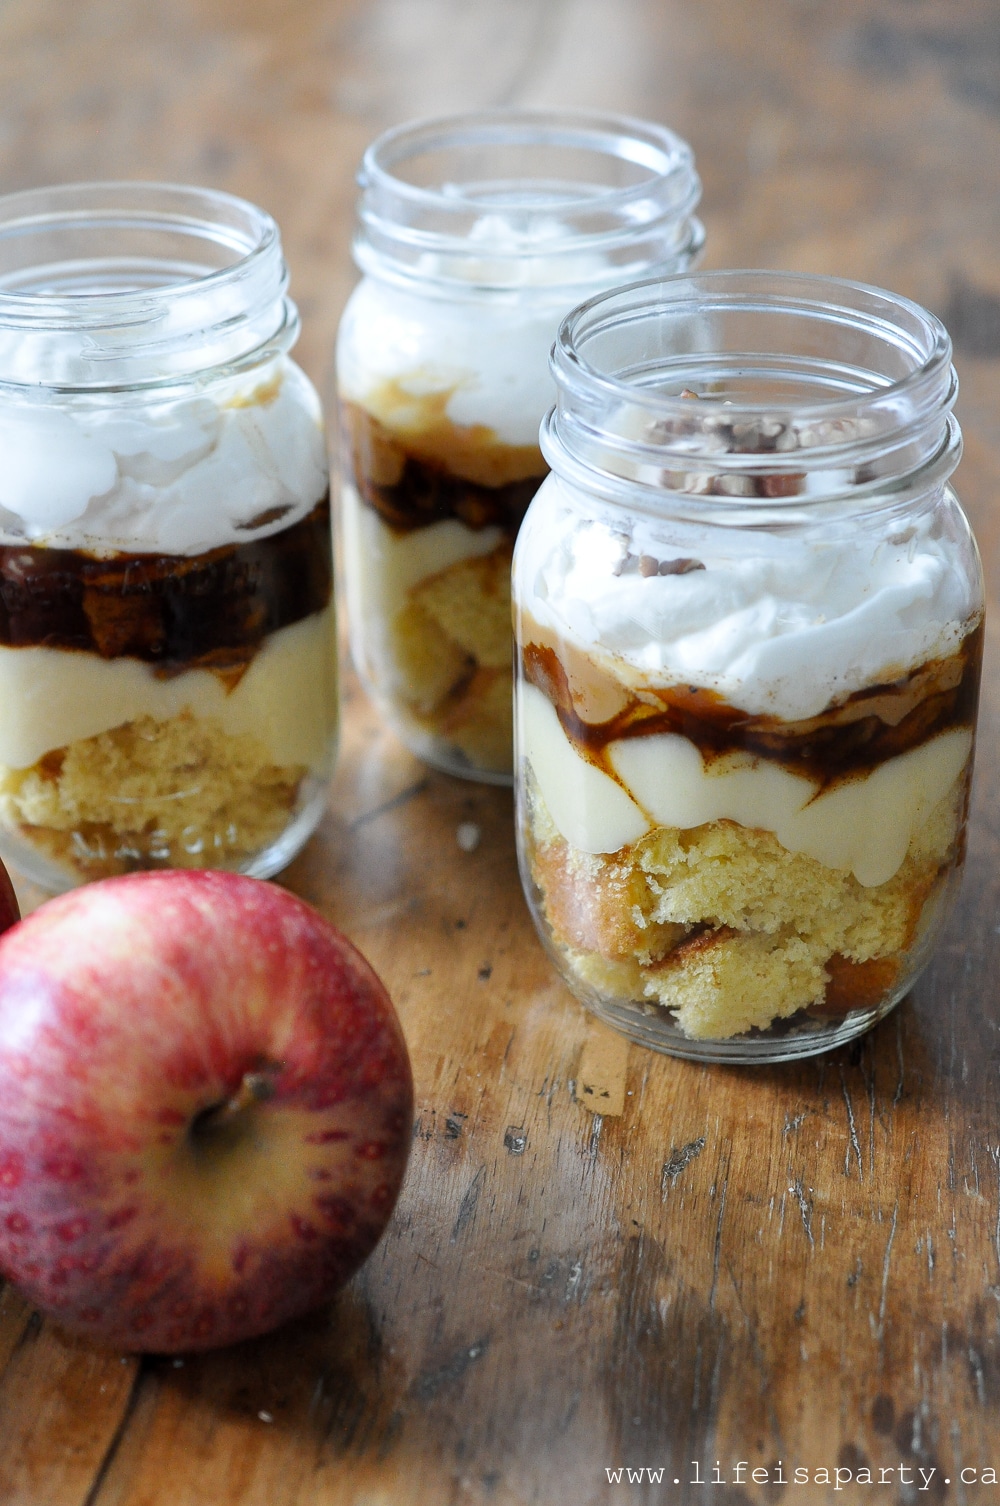 Caramel Apple Trifle: layers of cake, caramel, cooked apples, custard, and whipped cream create the perfect fall dessert.